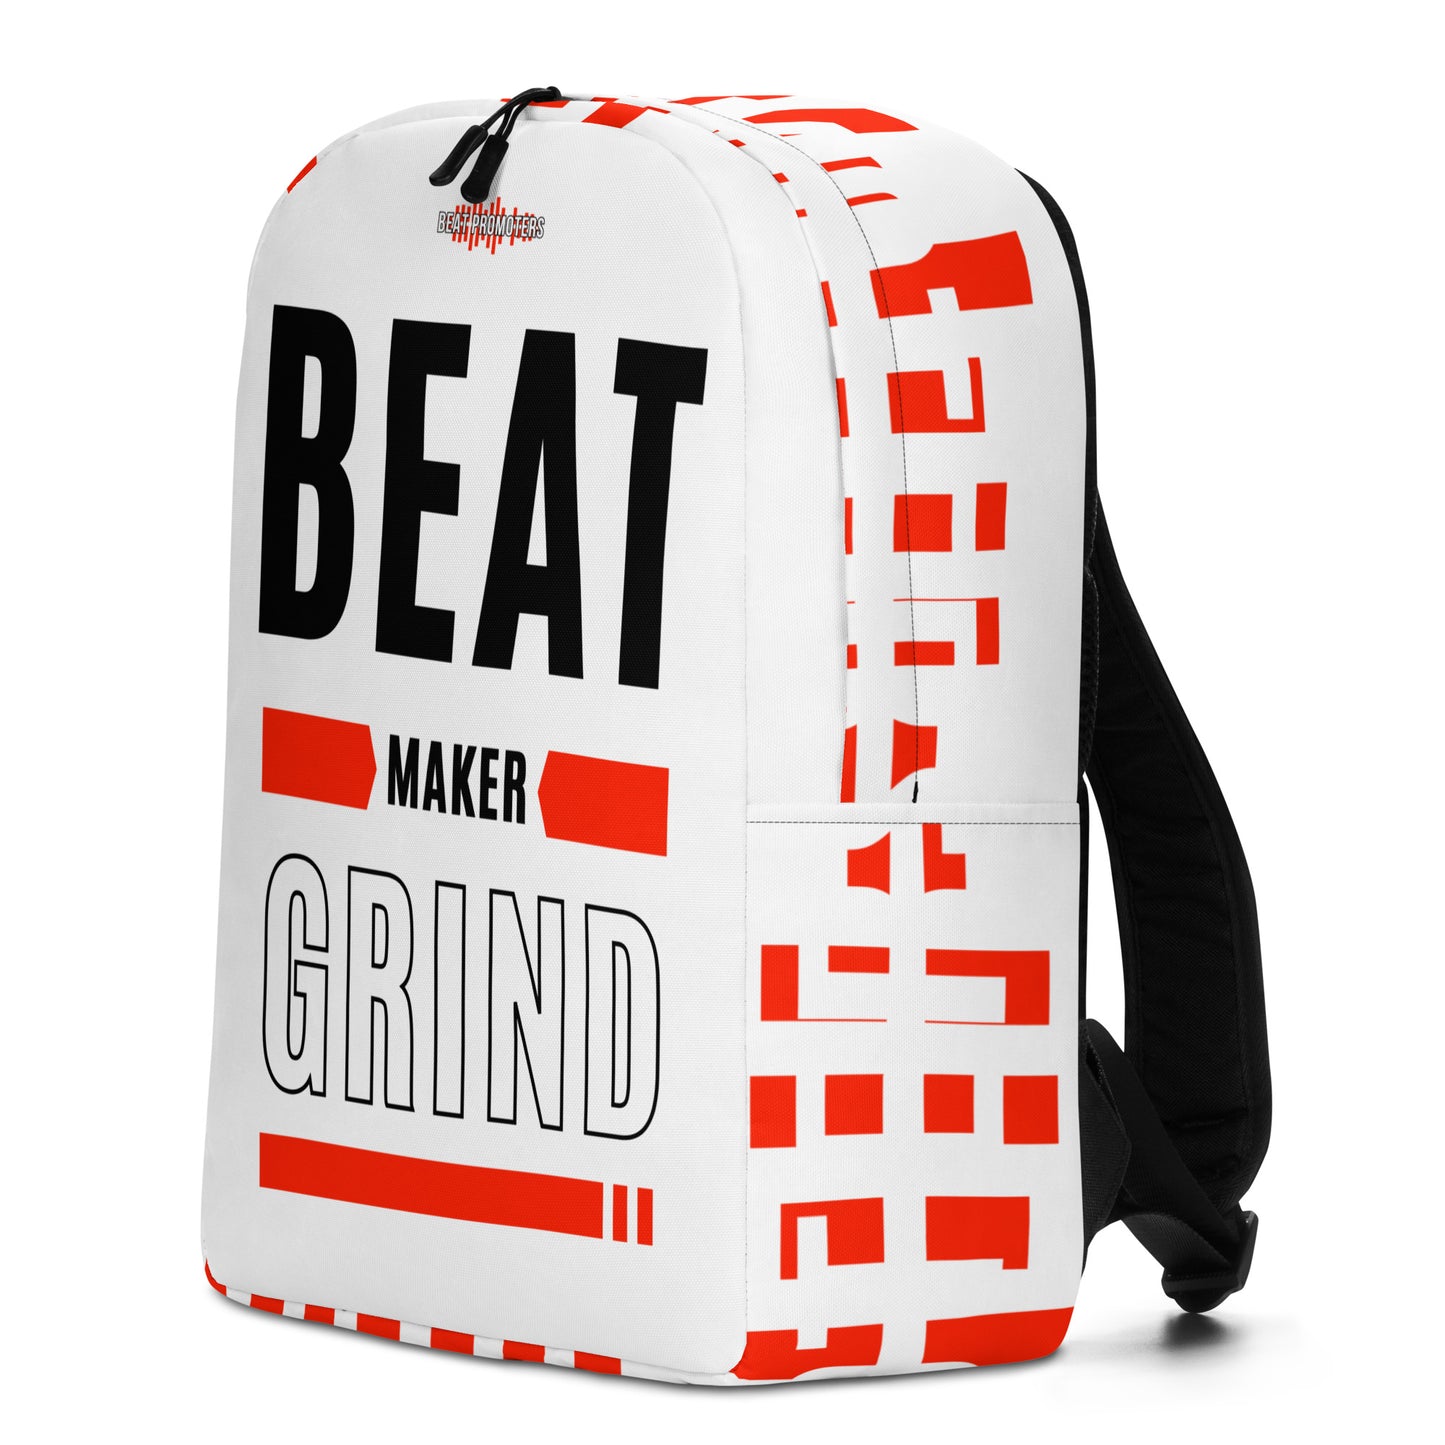 Beatmaker Laptop / Drum Machine and Accessories Backpack - White